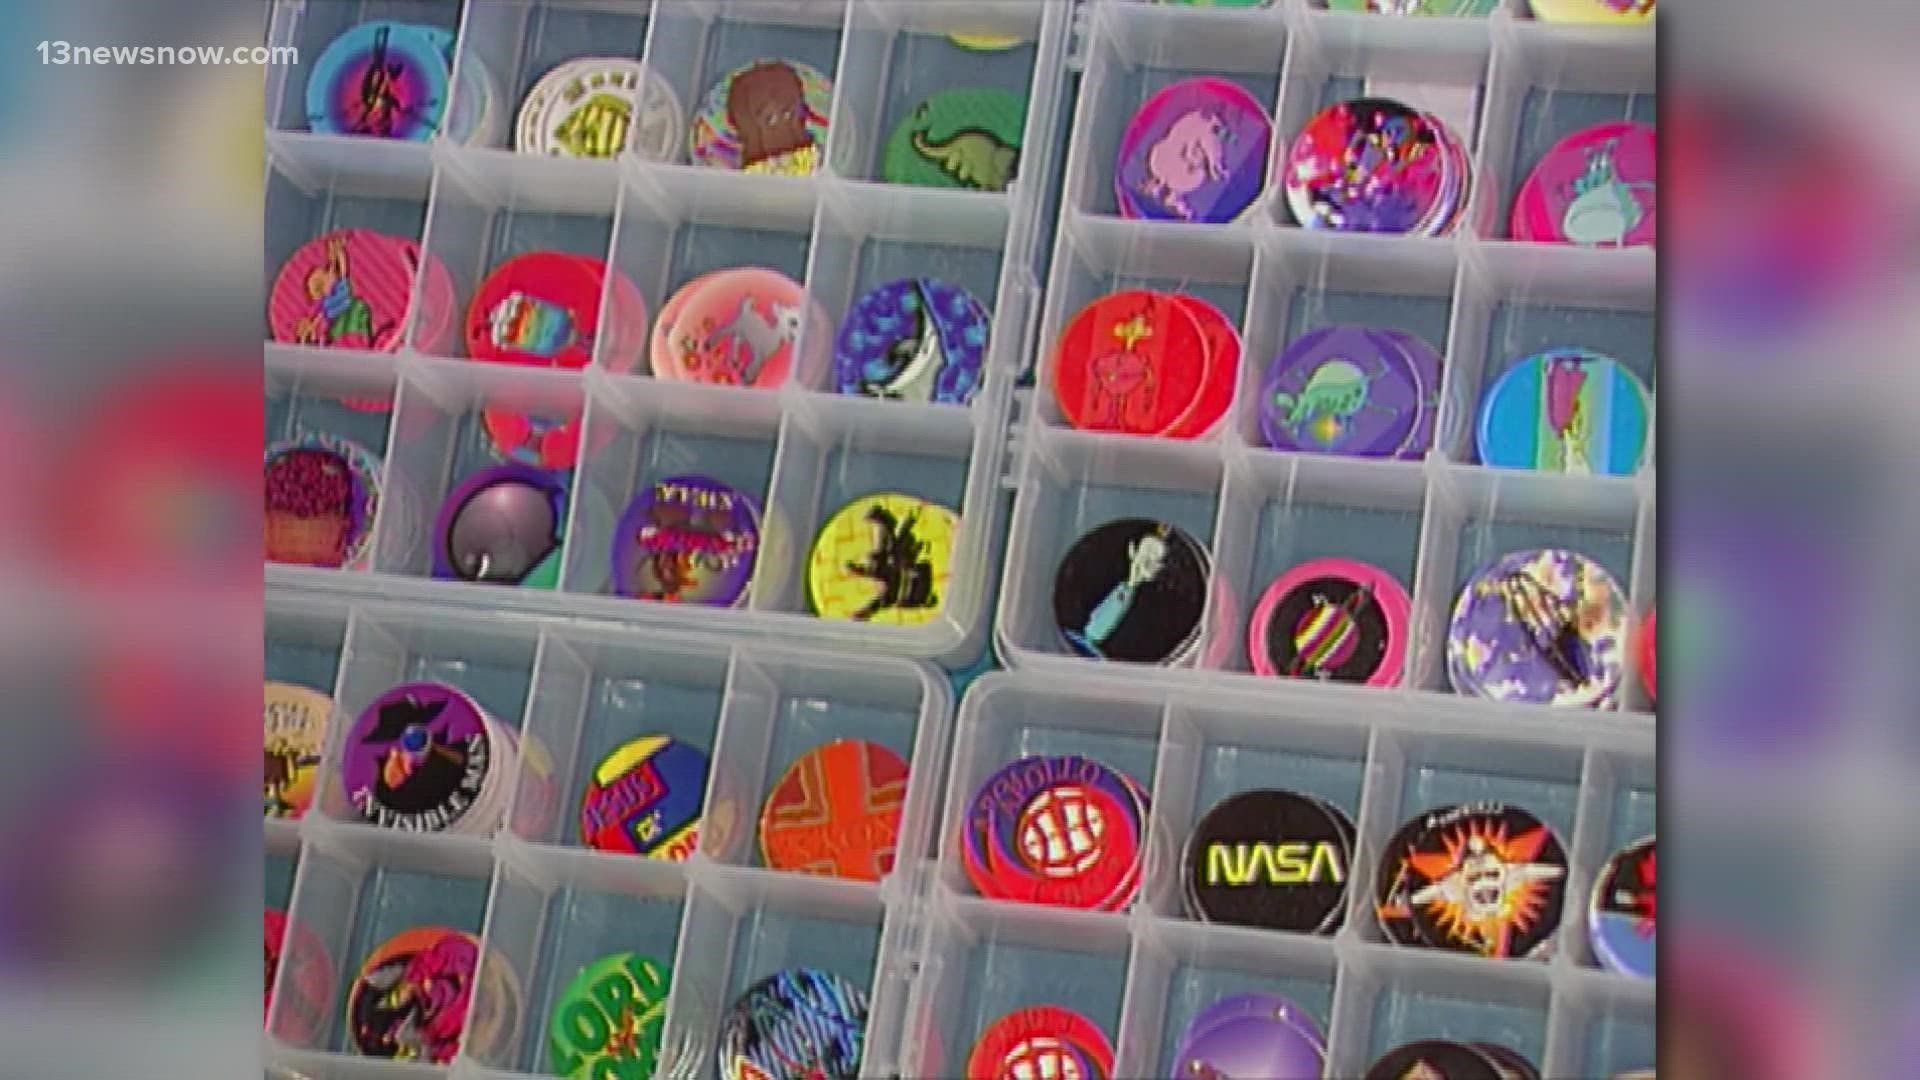 All you needed to have fun 28 years ago was a pile of milk caps known as Pogs.